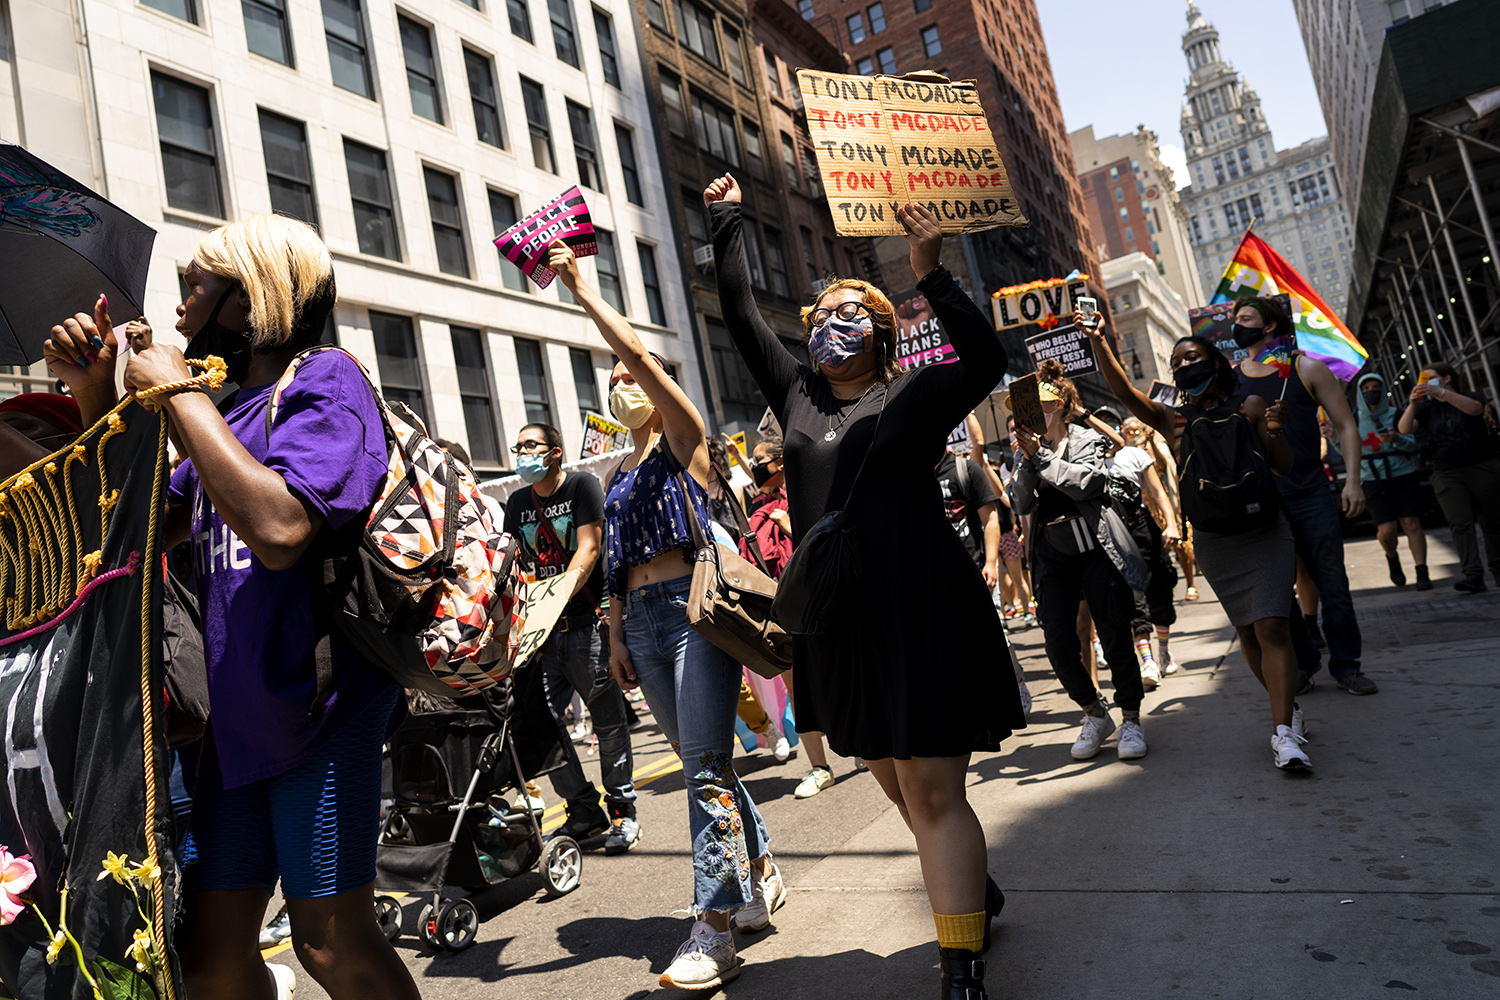 Protesters and supporters took to the streets of Manhattan on Sunday. (Photo by Tsubasa Berg)